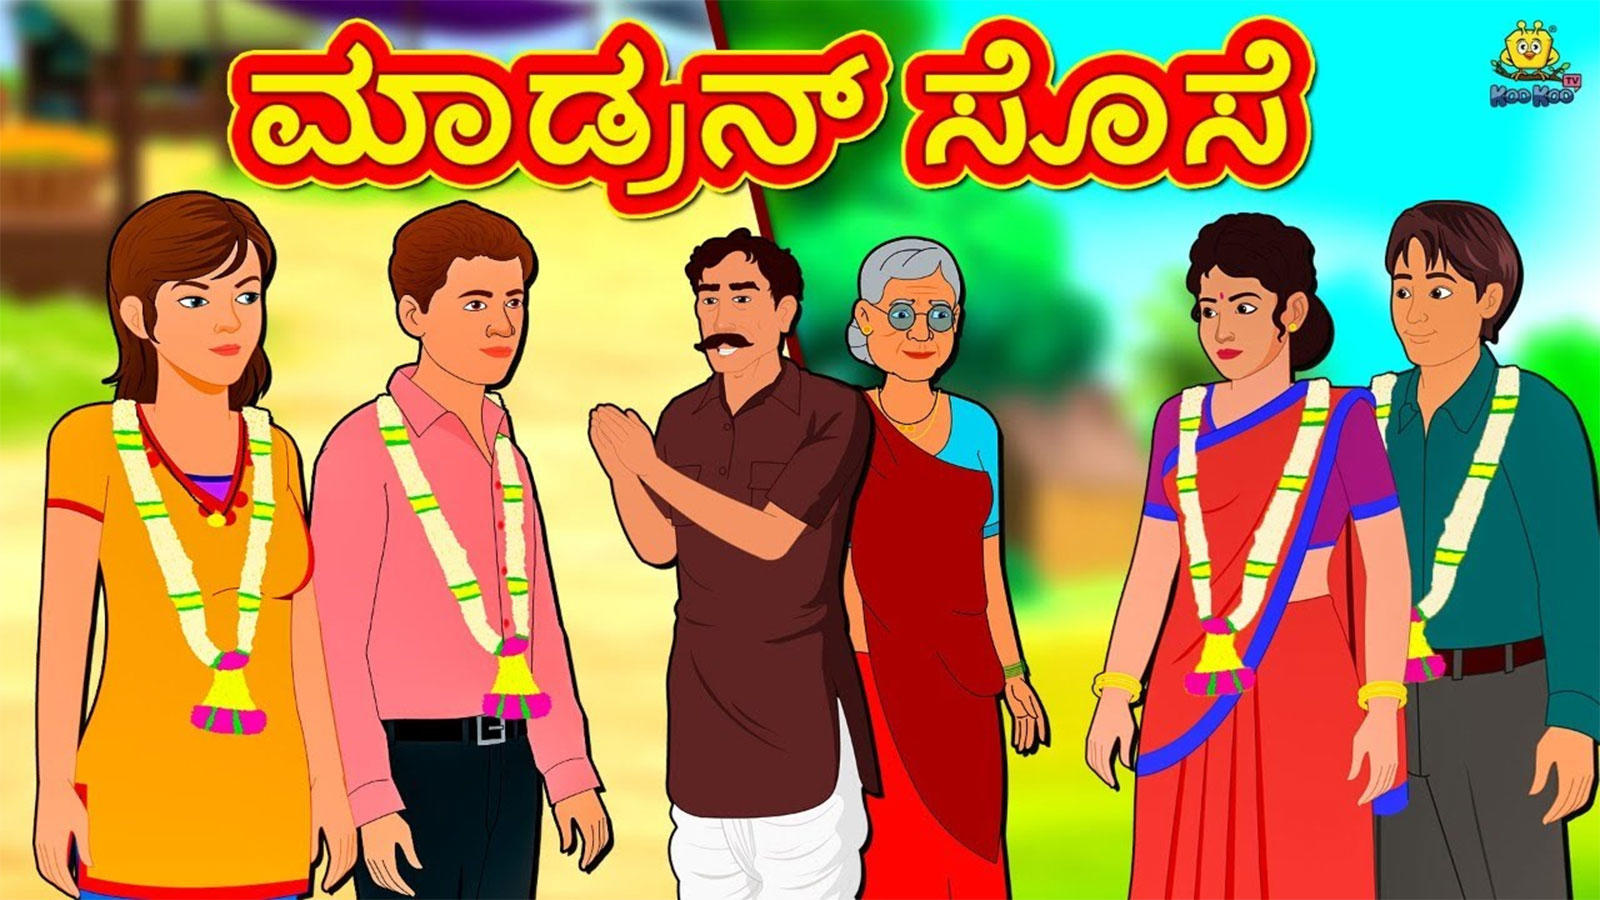 Check Out Popular Kids Kannada Nursery Story 'The Modern Daughter In Law'  for Kids - Watch Children's Nursery Stories, Baby Songs, Fairy Tales In  Kannada | Entertainment - Times of India Videos